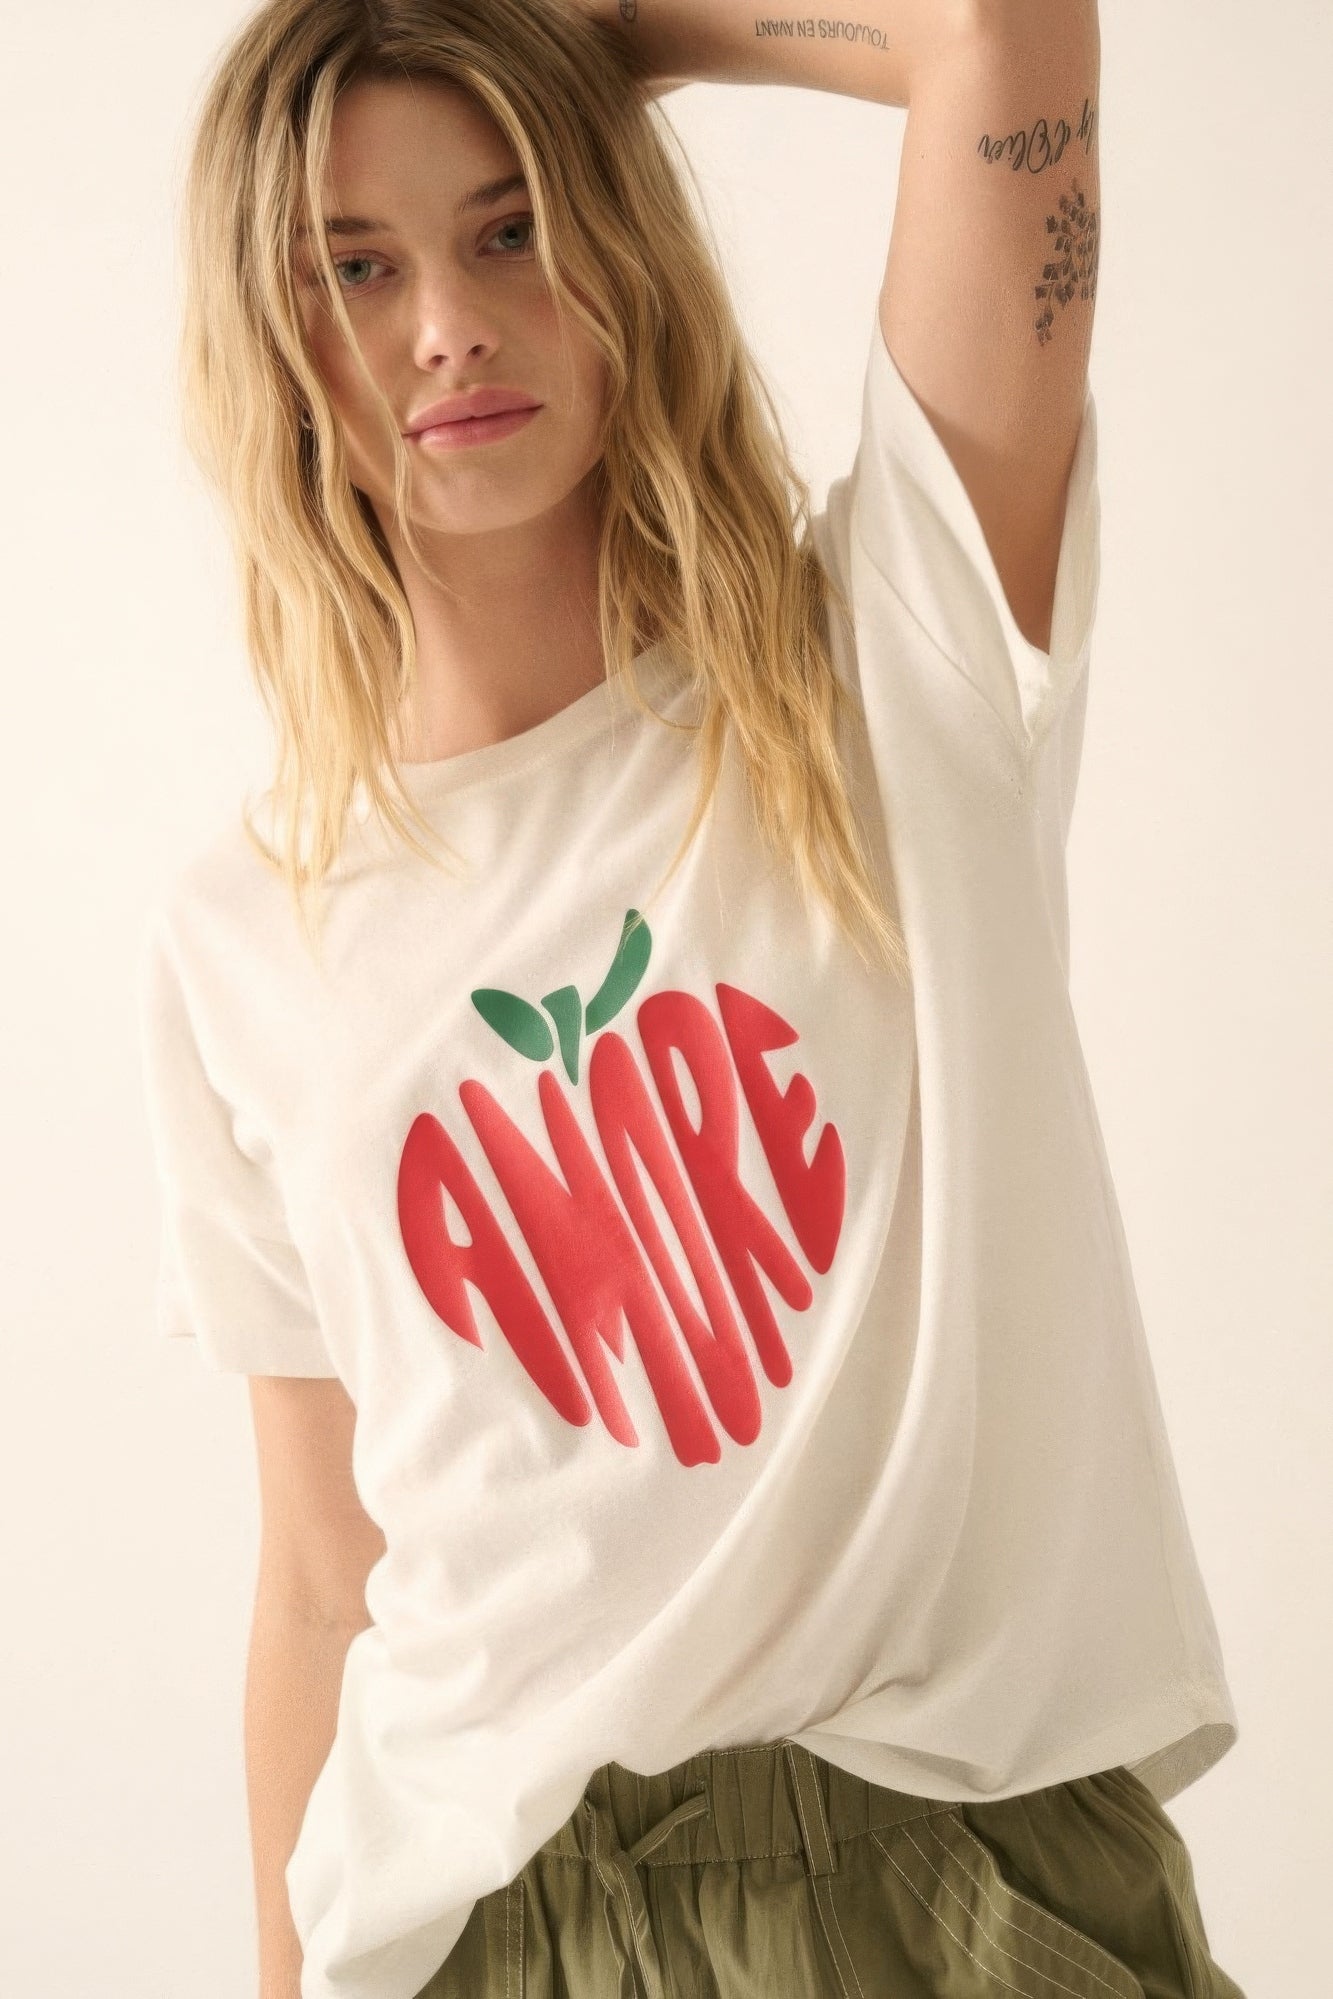 Blue Zone Planet |  Amore Garment-washed Fruit Graphic Tee Blue Zone Planet